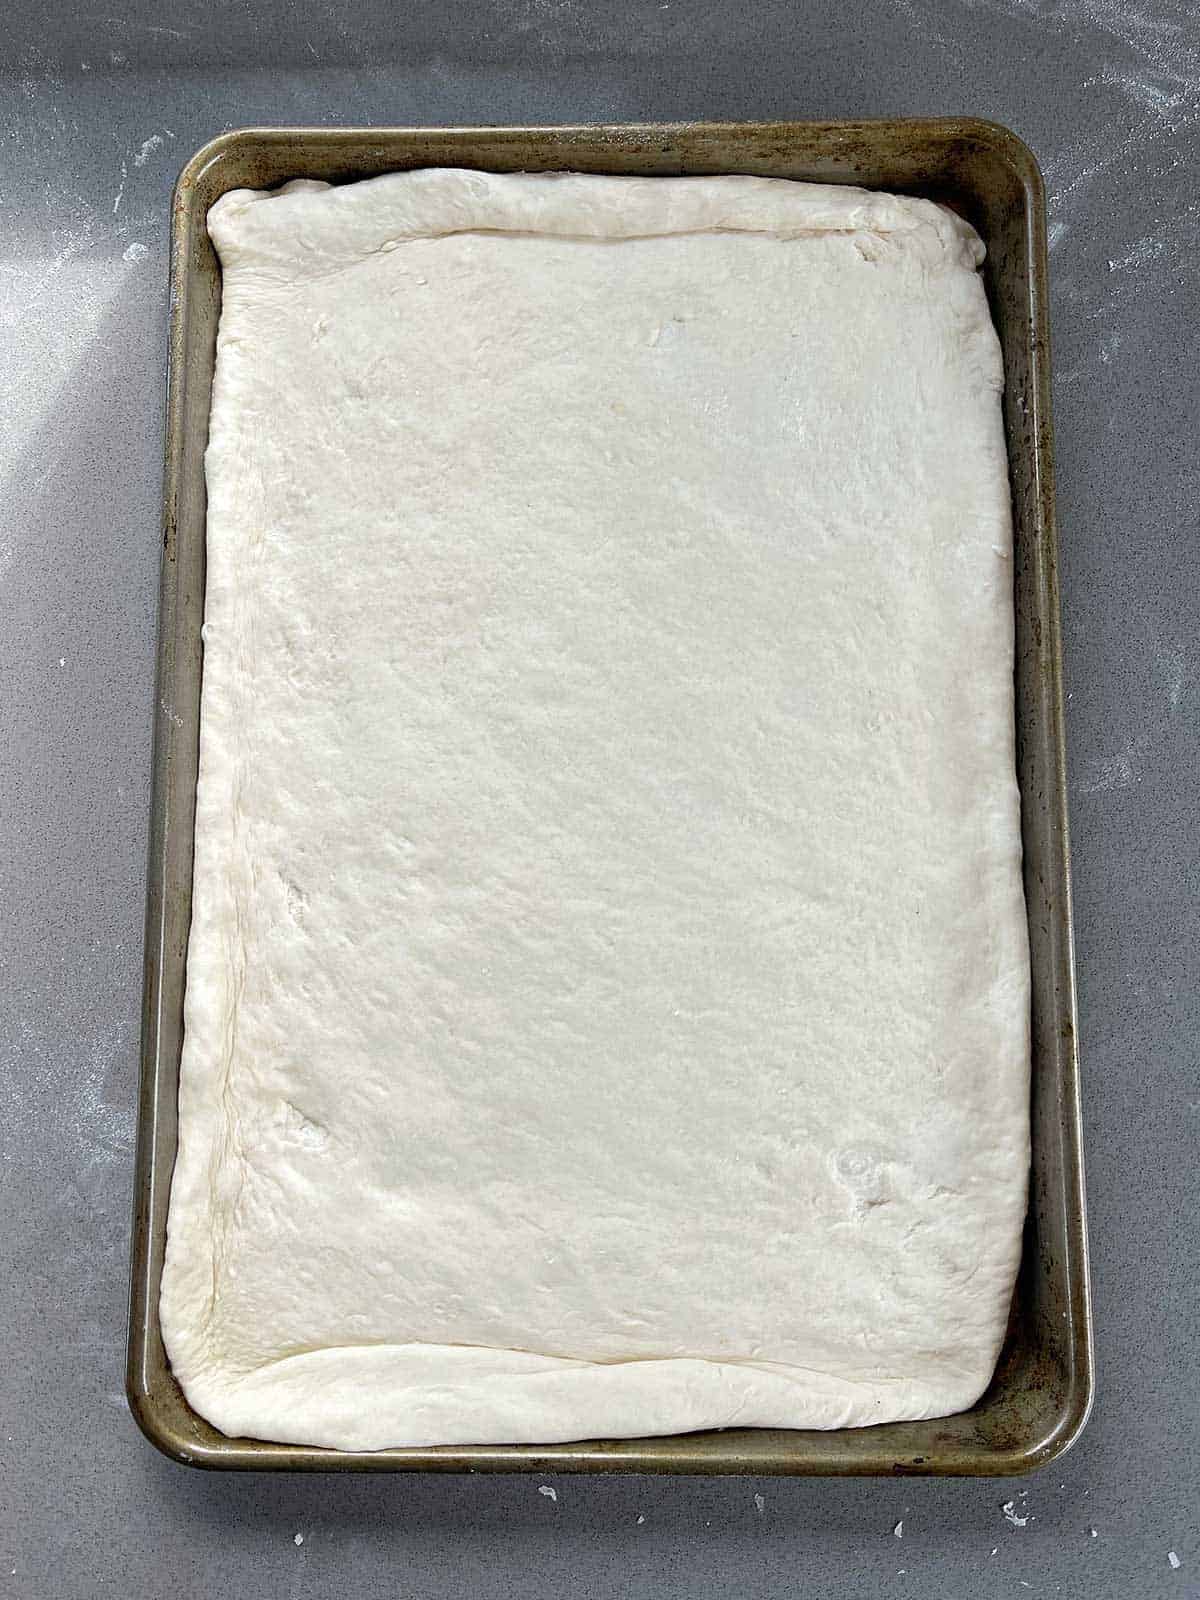 Uncooked, rolled out pizza dough sitting on a baking tray.